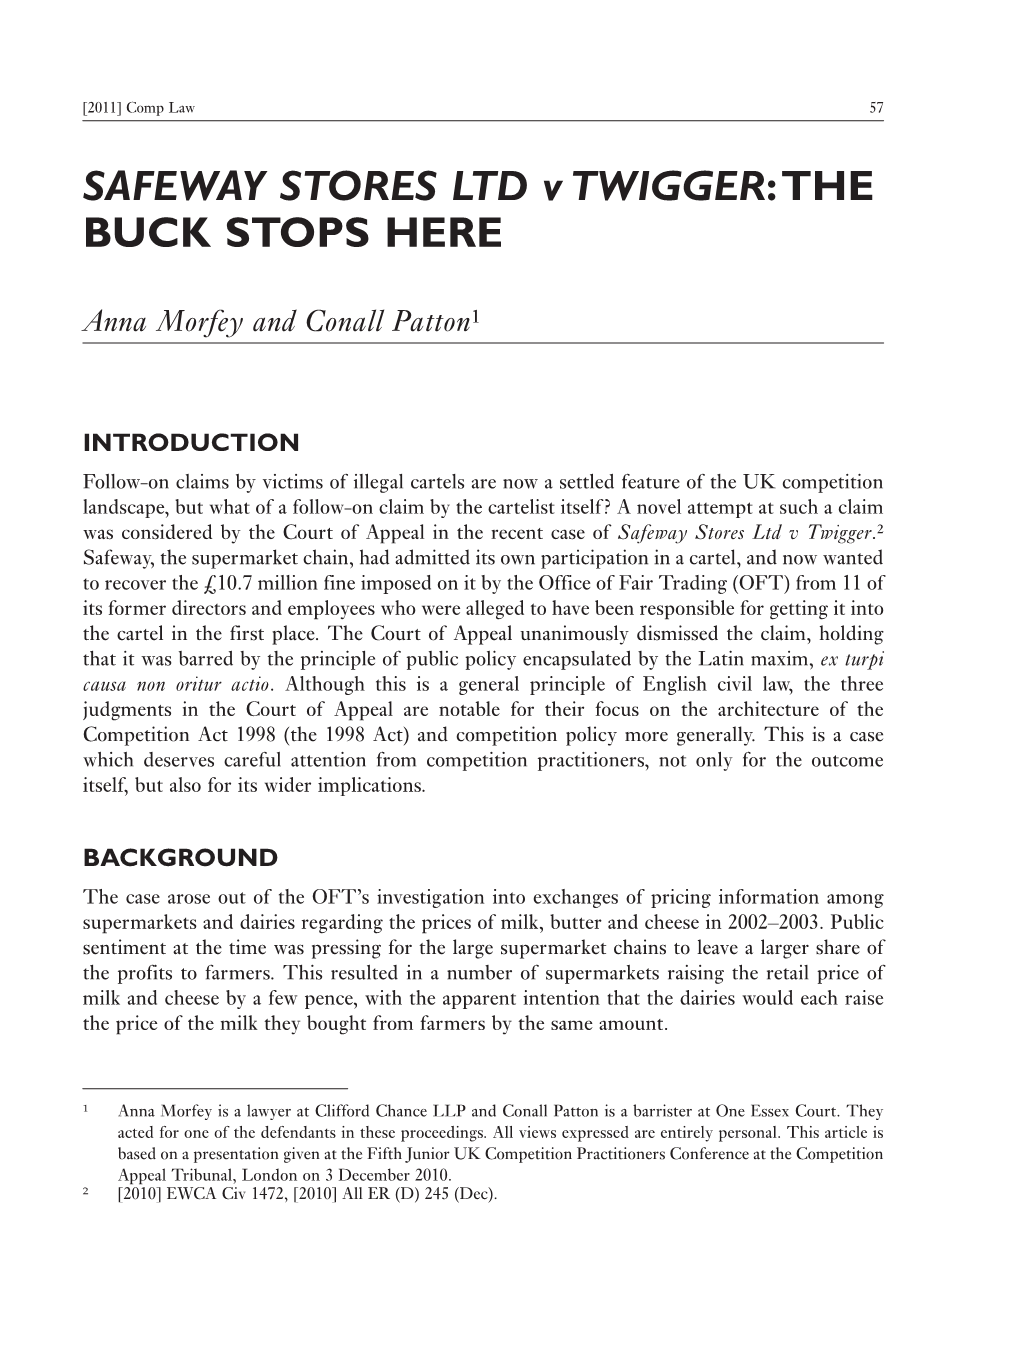 SAFEWAY STORES LTD V TWIGGER:THE BUCK STOPS HERE